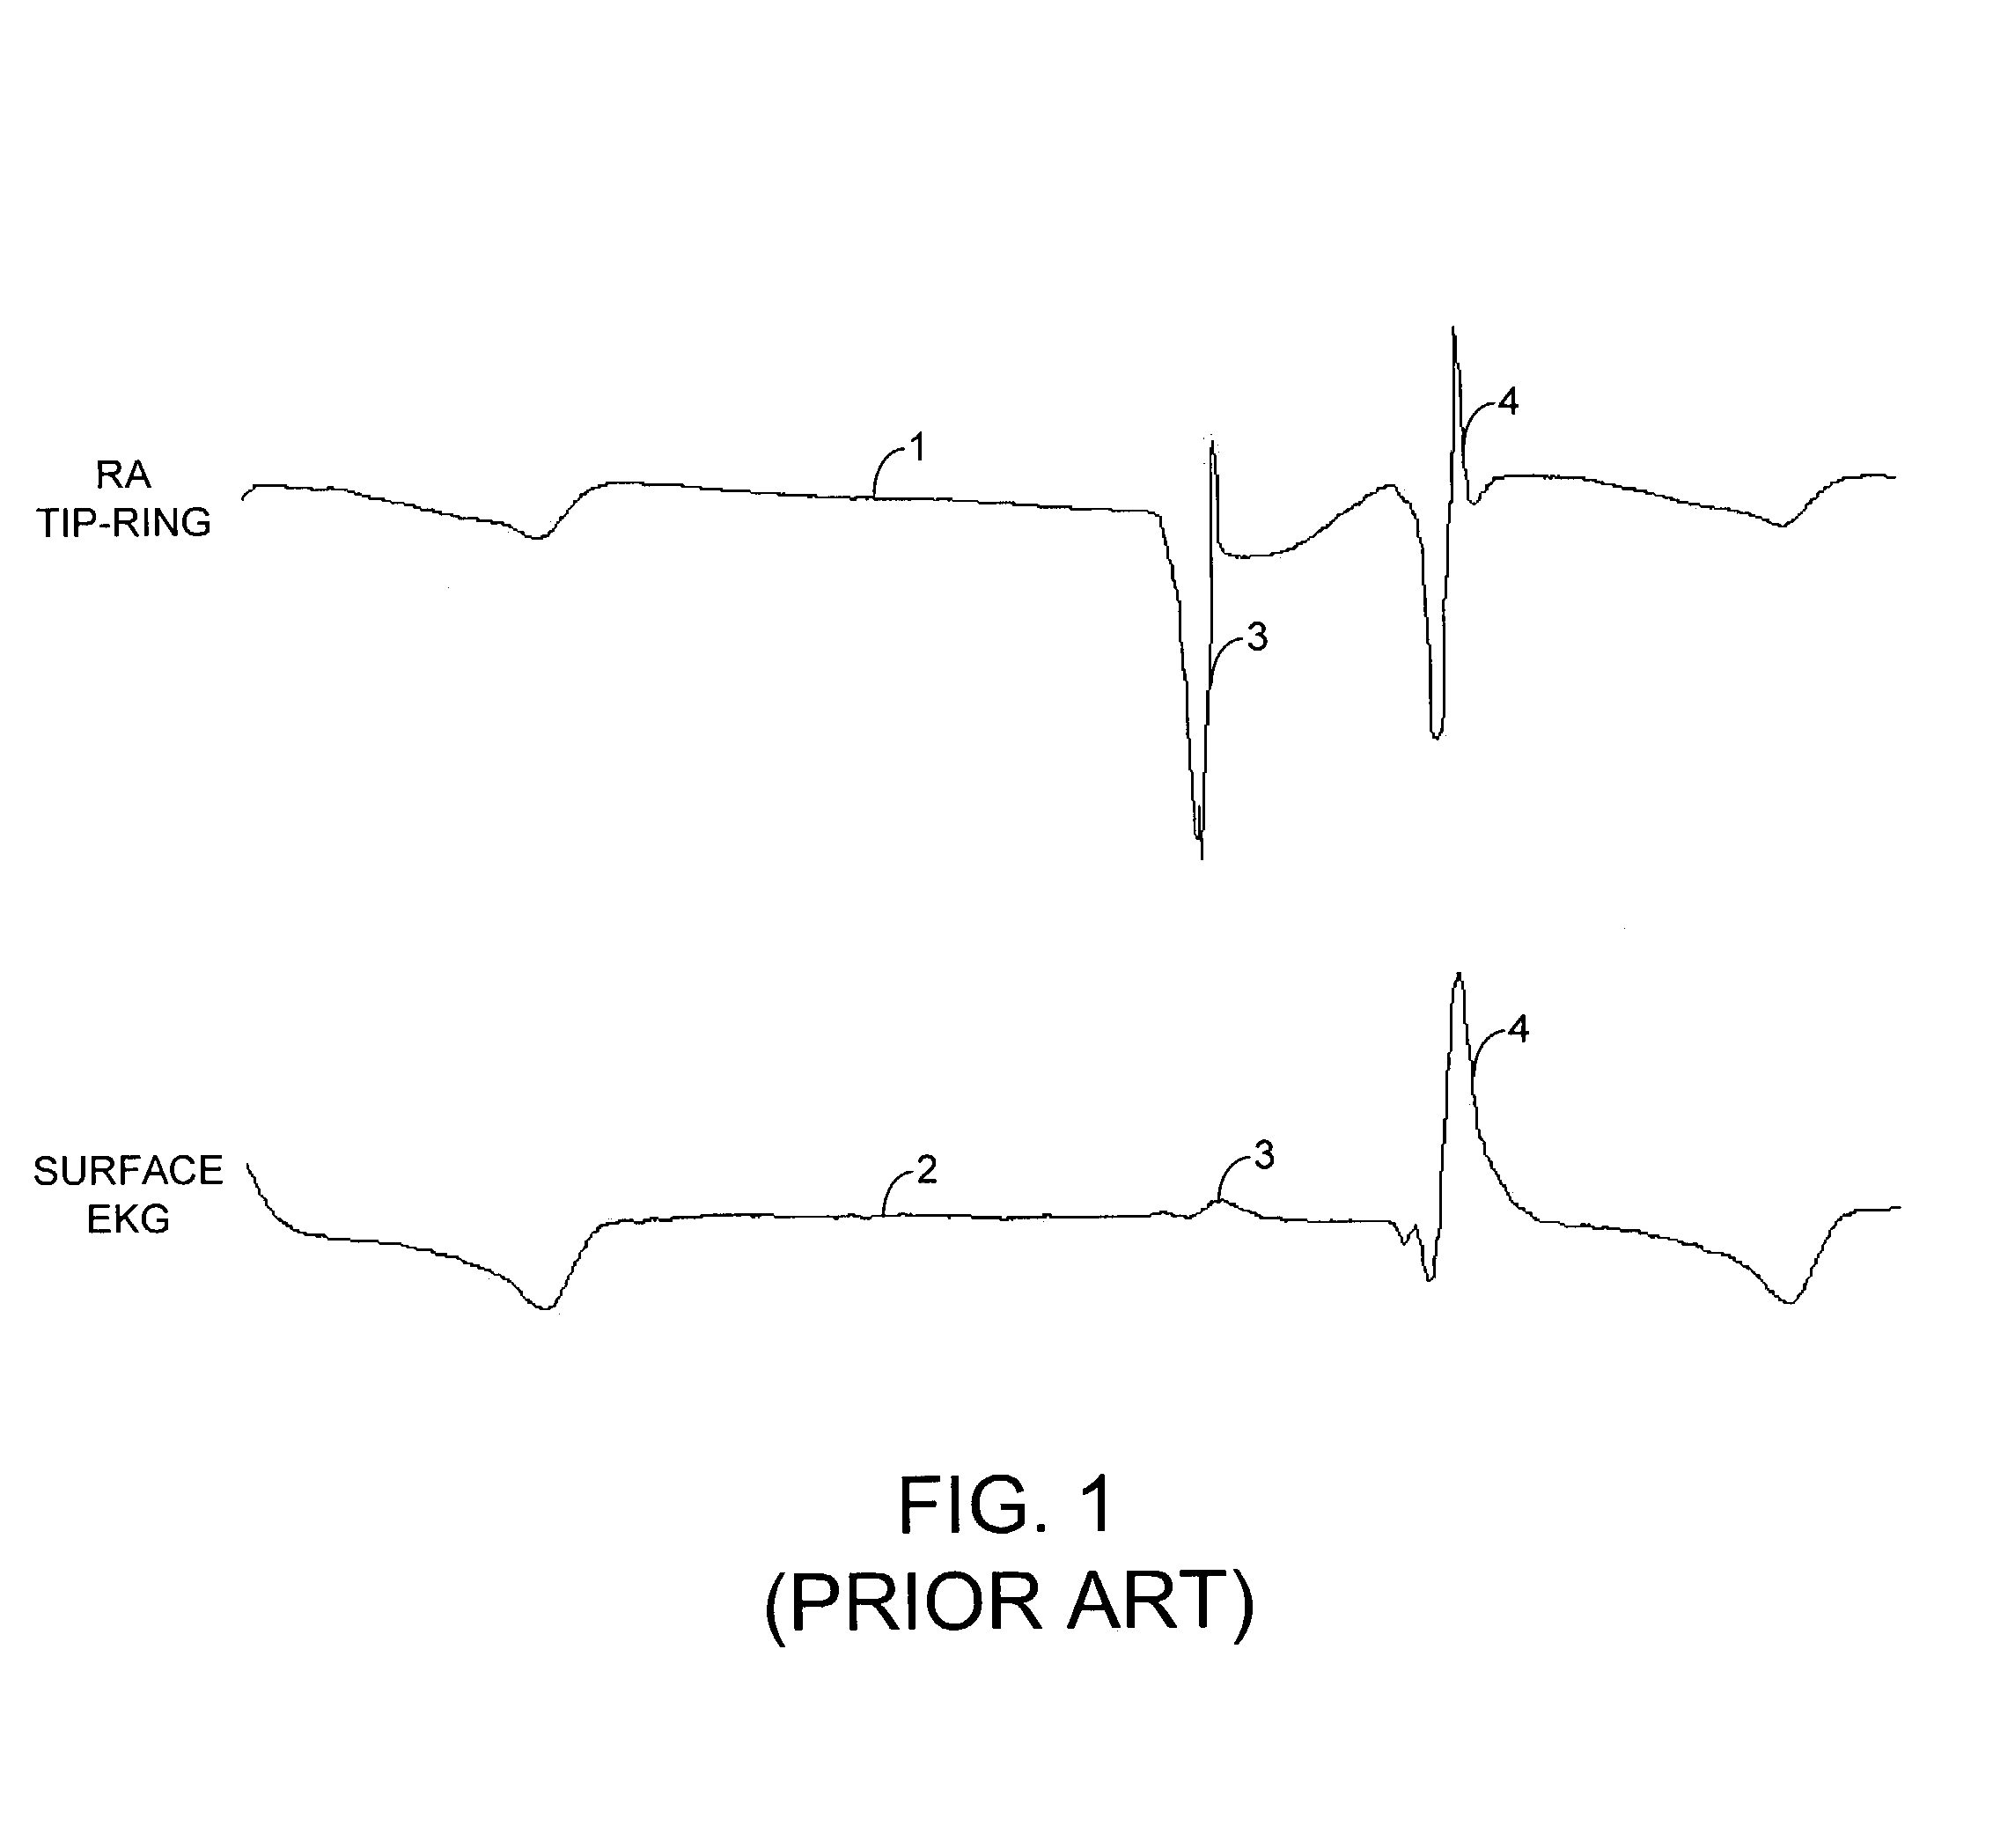 System and method for rejecting far-field signals using an implantable cardiac stimulation device